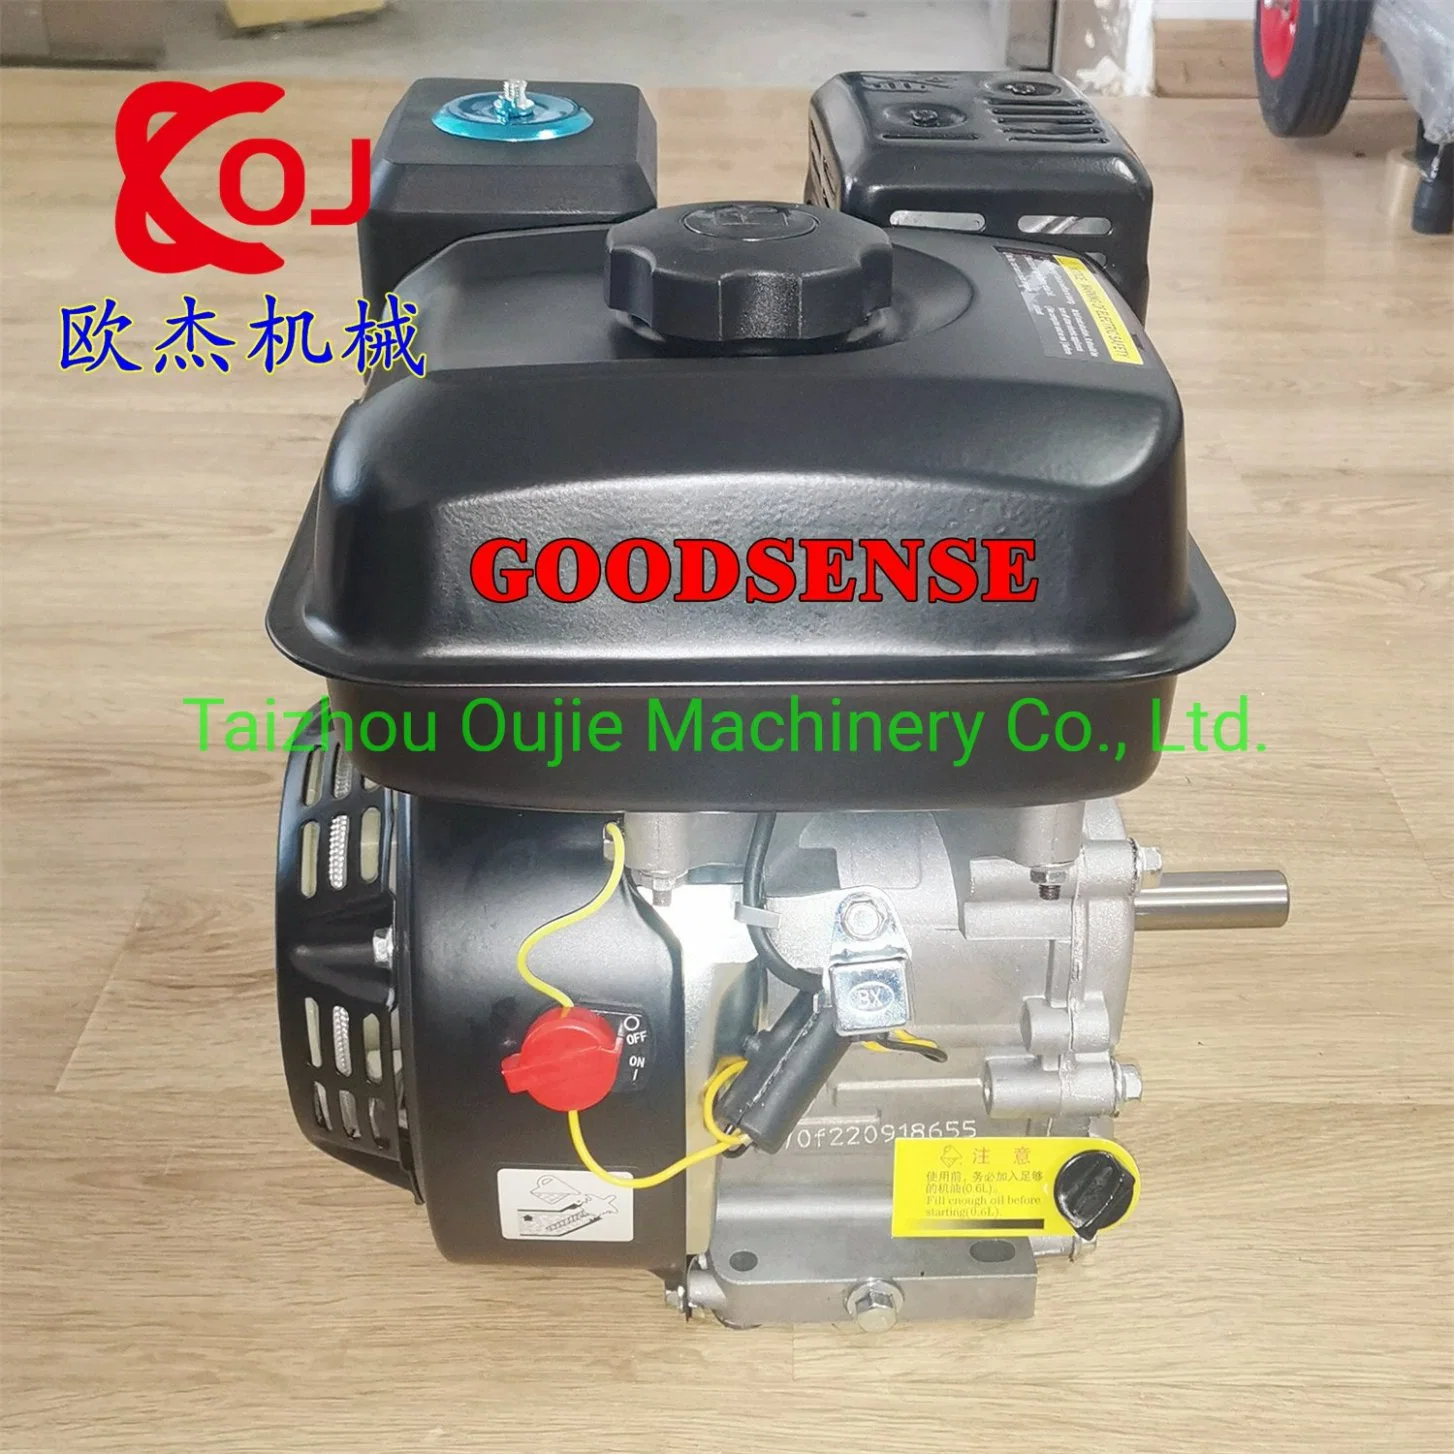 Goodsense Brand Factory Directly Supplies The General Gasoline Engine 168 Power 5.5HP High Cost Performance and Fuel Saving